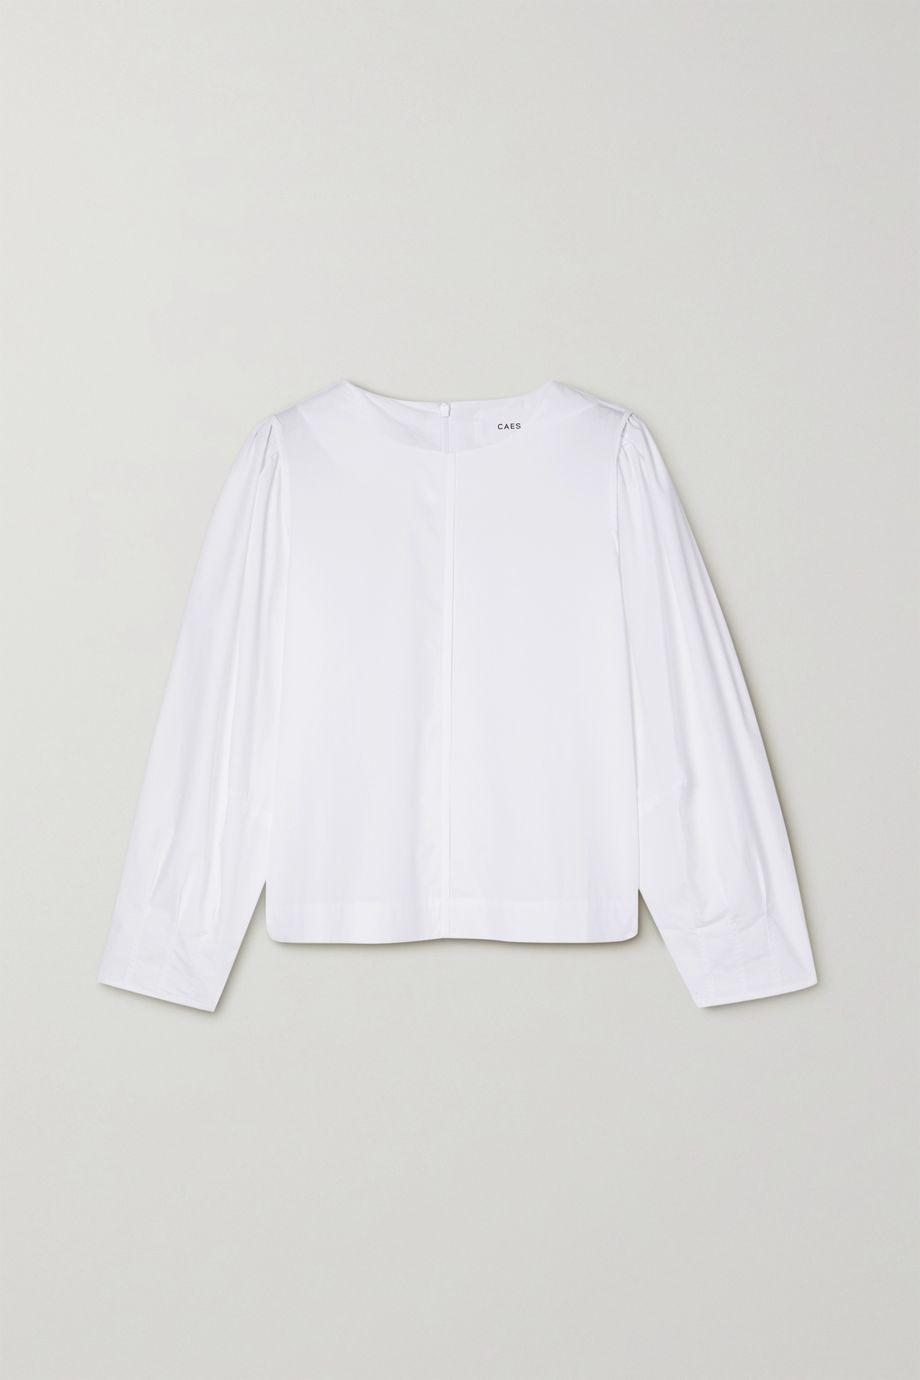 Lyocell and cotton-blend poplin blouse by CAES